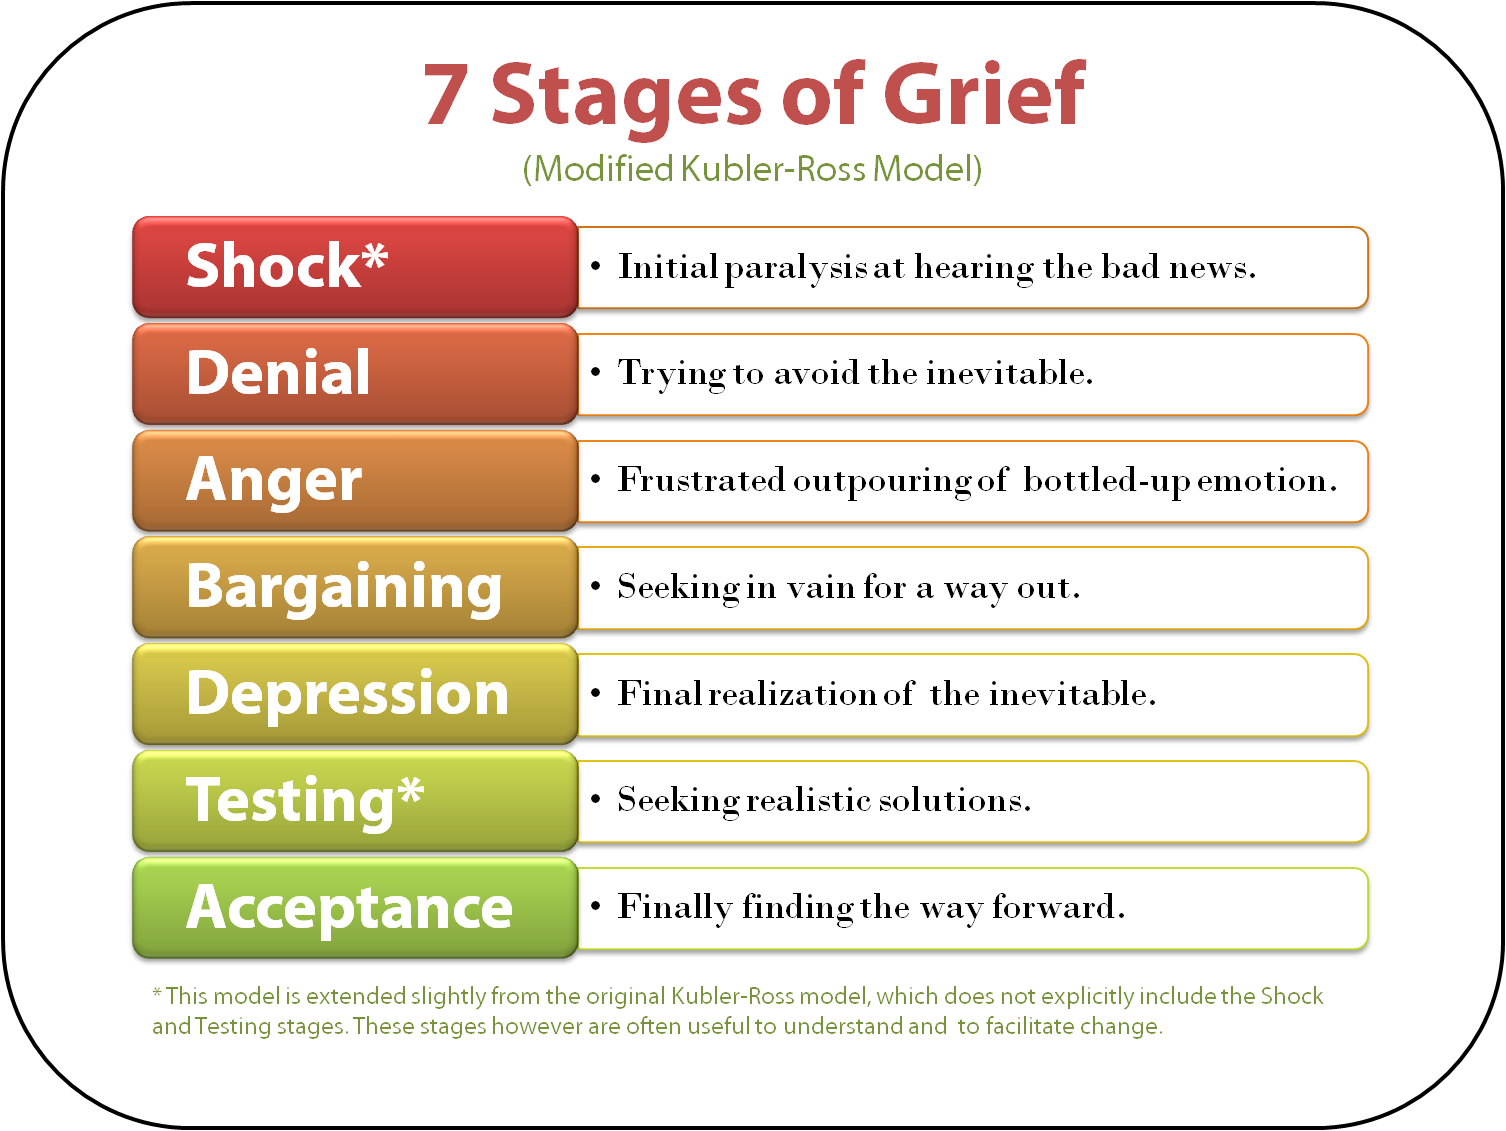 STAGES OF GRIEF Quotes Like Success